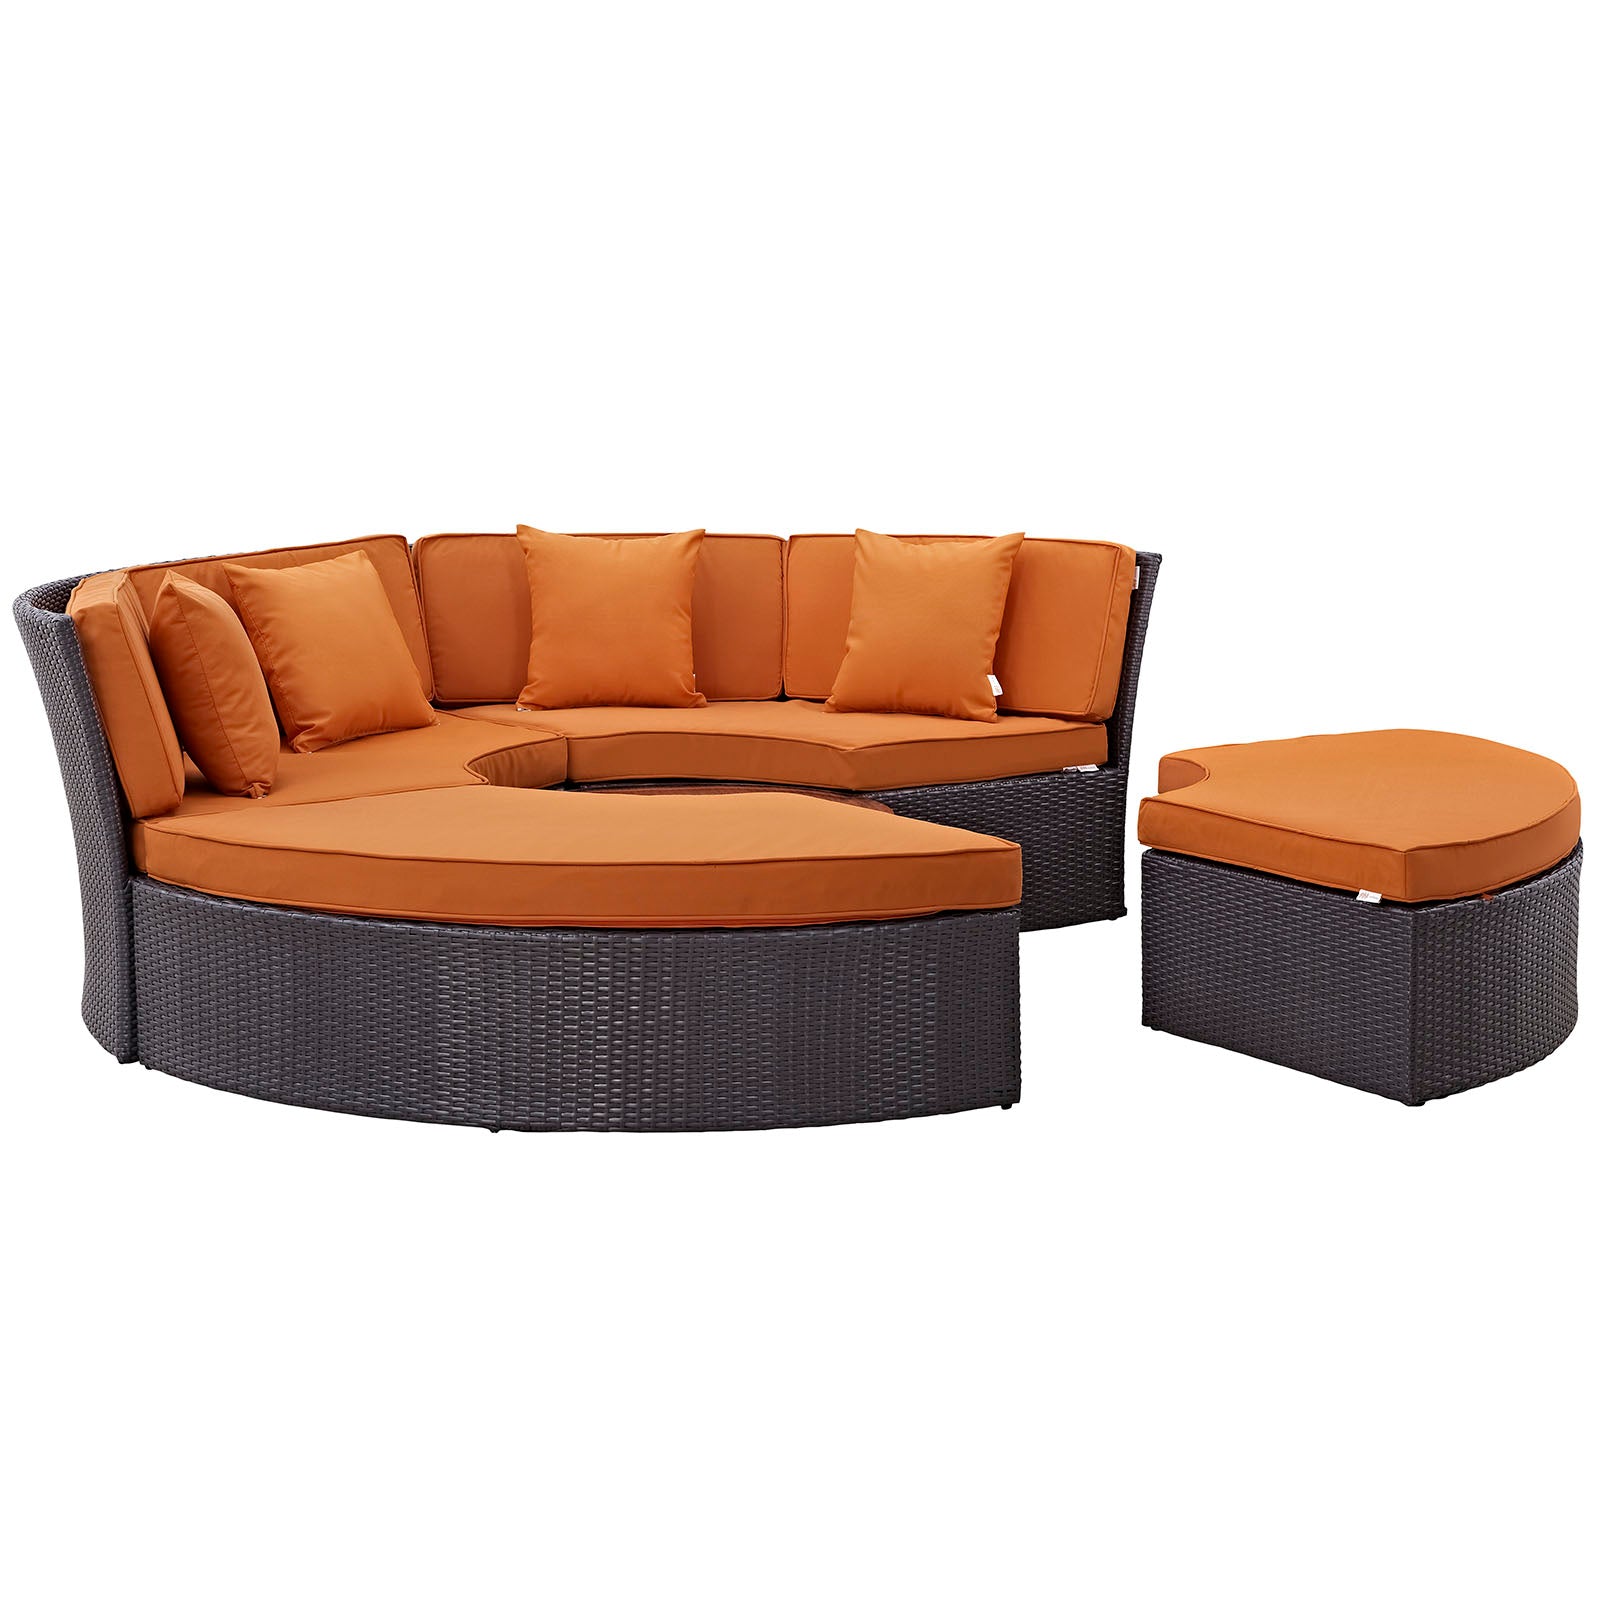 Convene Circular Outdoor Patio Daybed Set-Outdoor Bed-Modway-Wall2Wall Furnishings